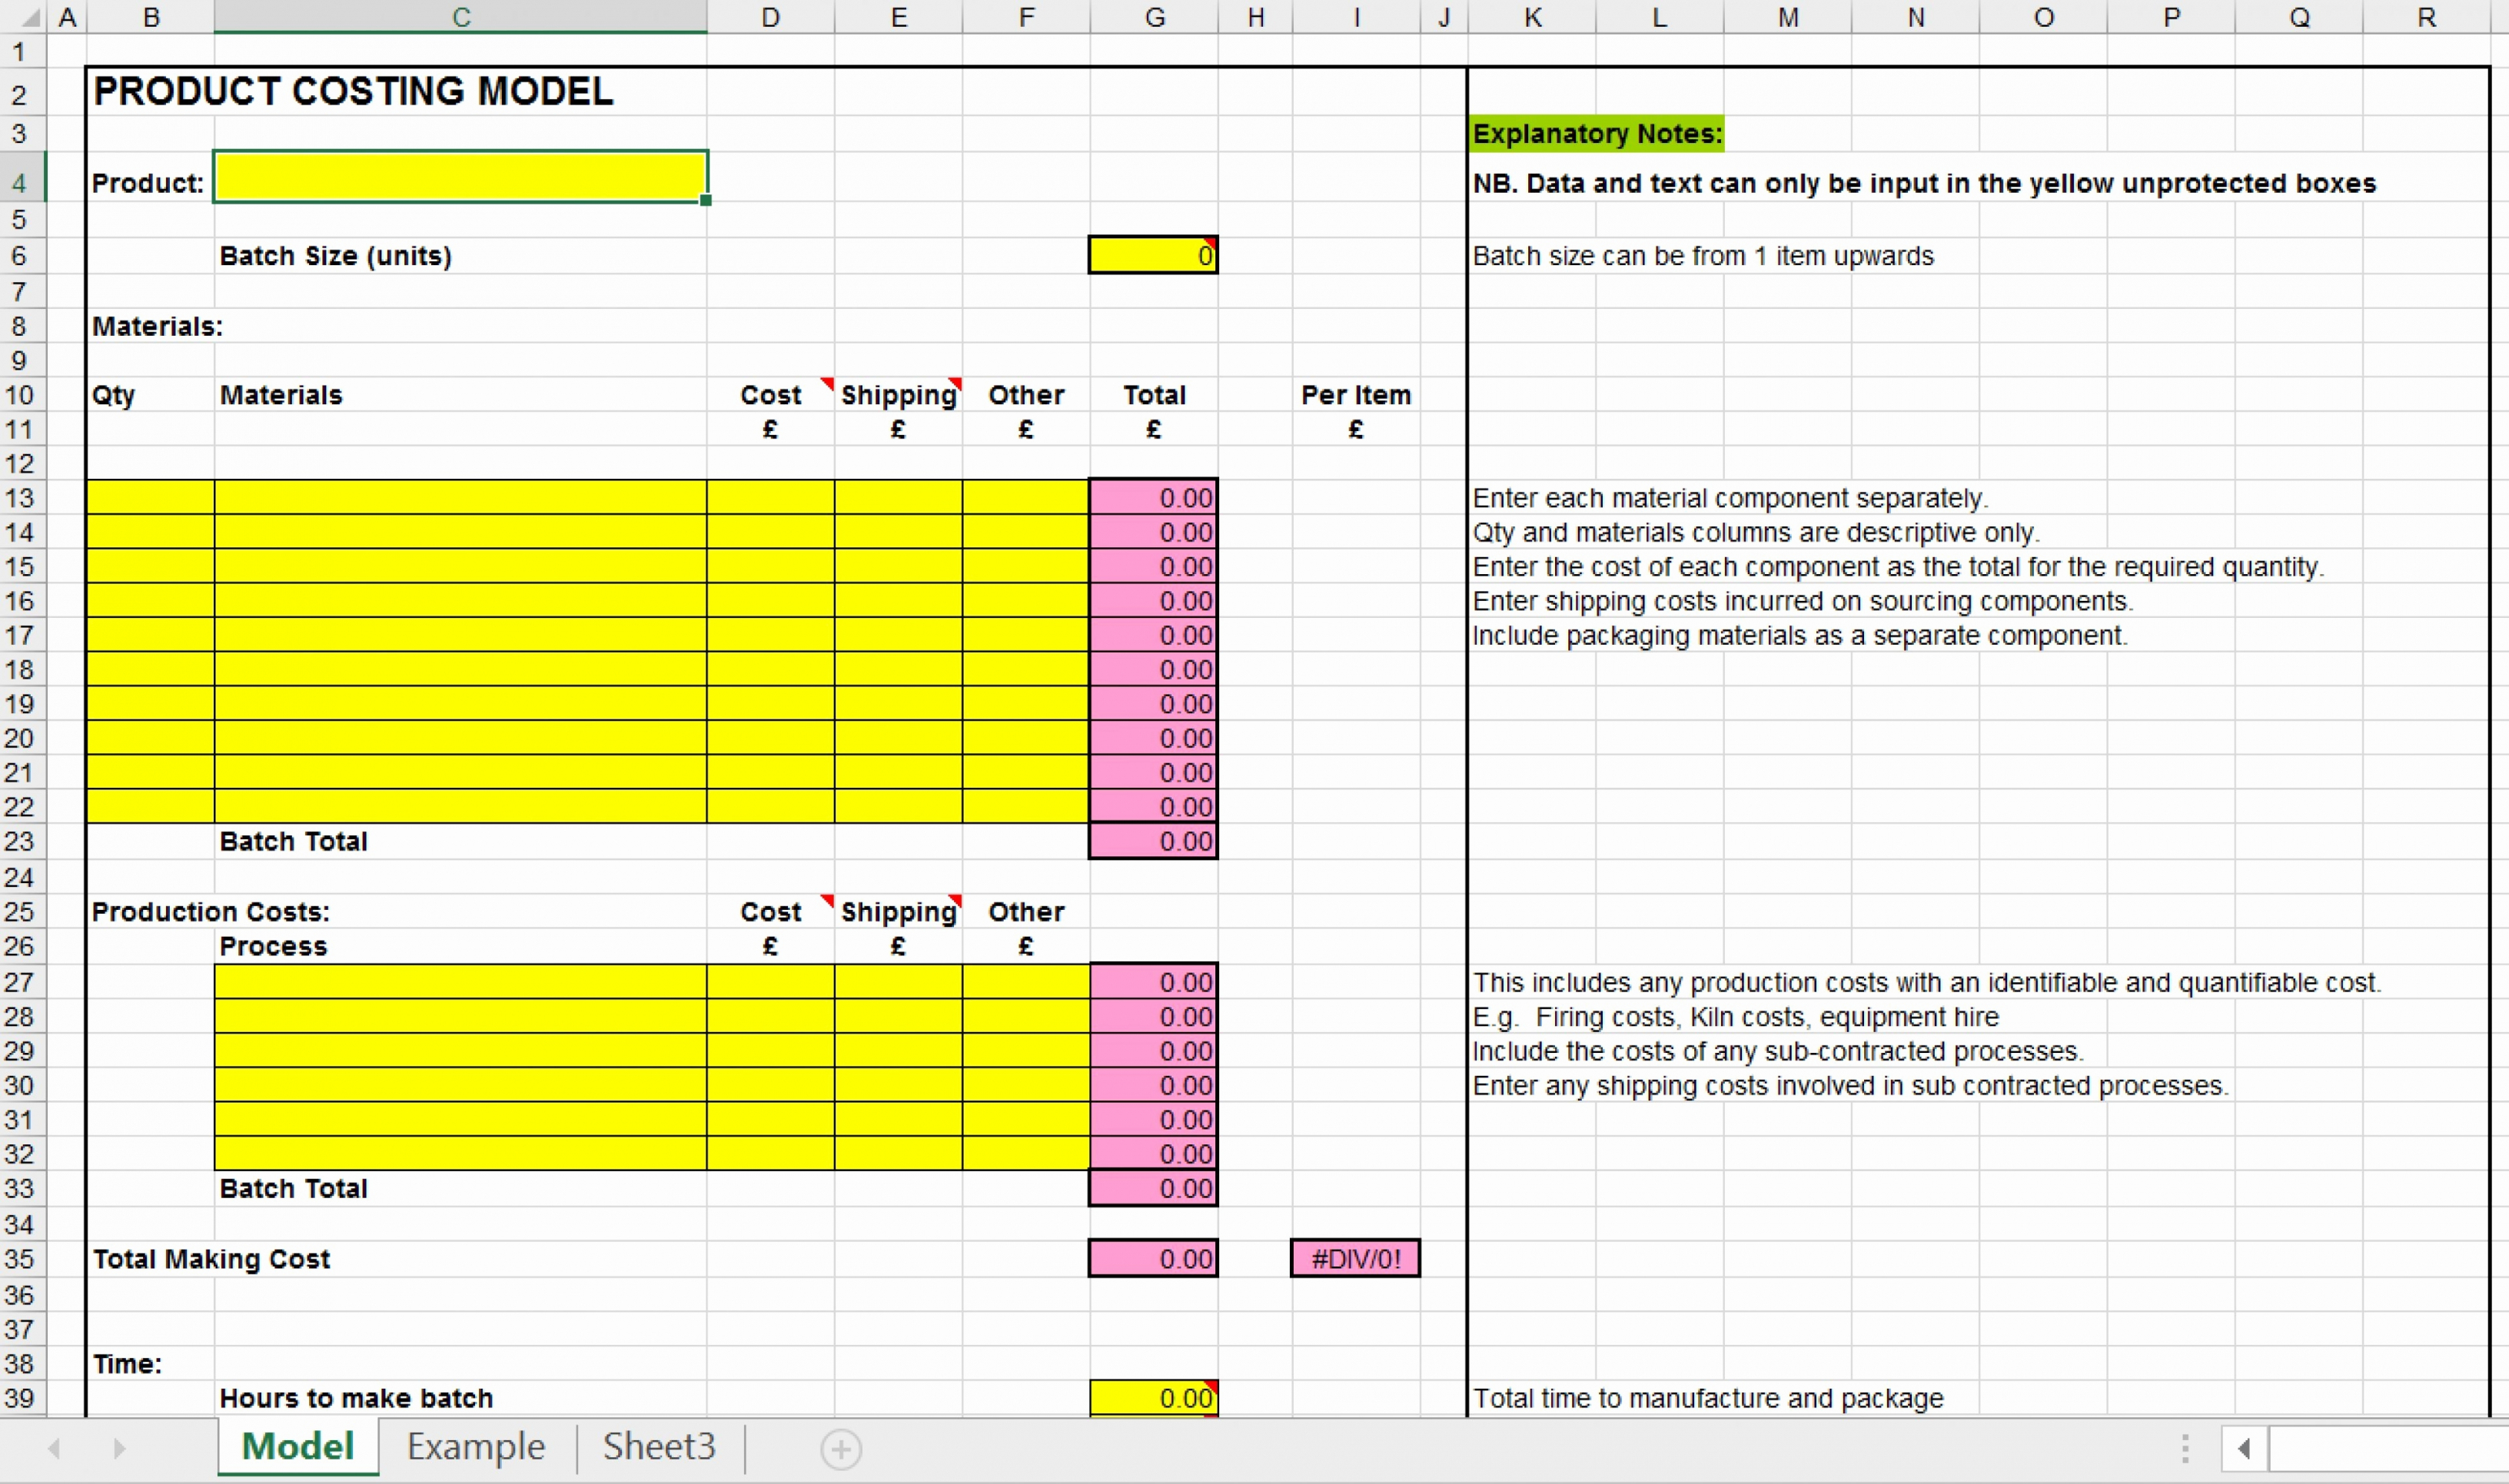 Life Cycle Cost Analysis Excel Spreadsheet Intended For Life Cycle Cost Analysis Excel Spreadsheet Design Of Vehicle Life